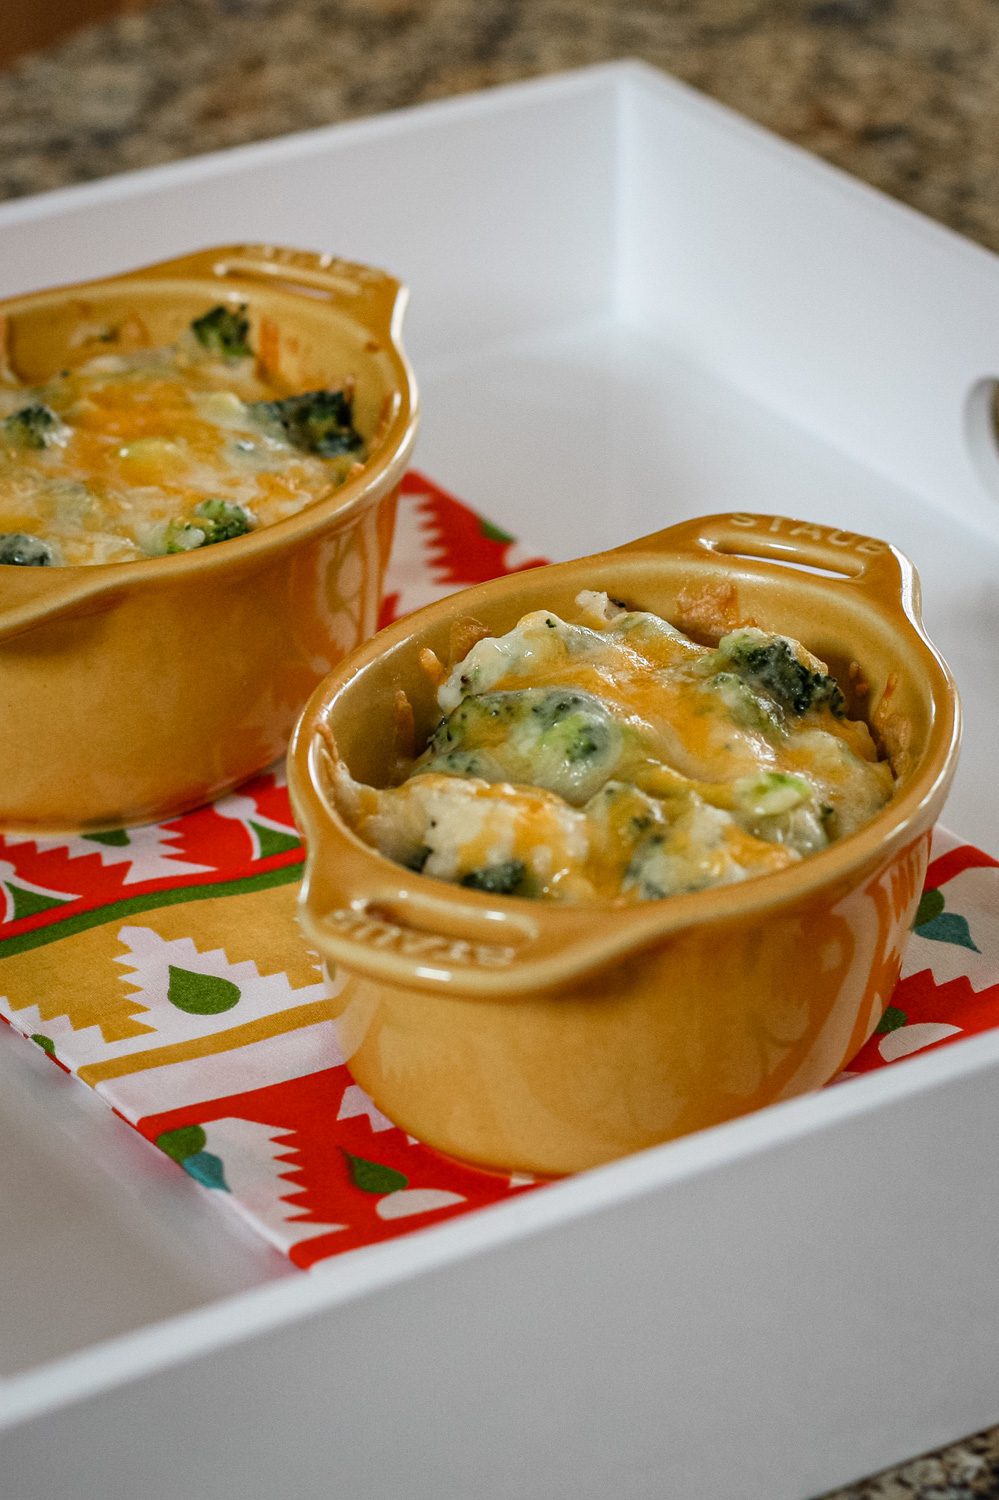 broccoli, rice, and cheese casseroles baked in mini cocottes